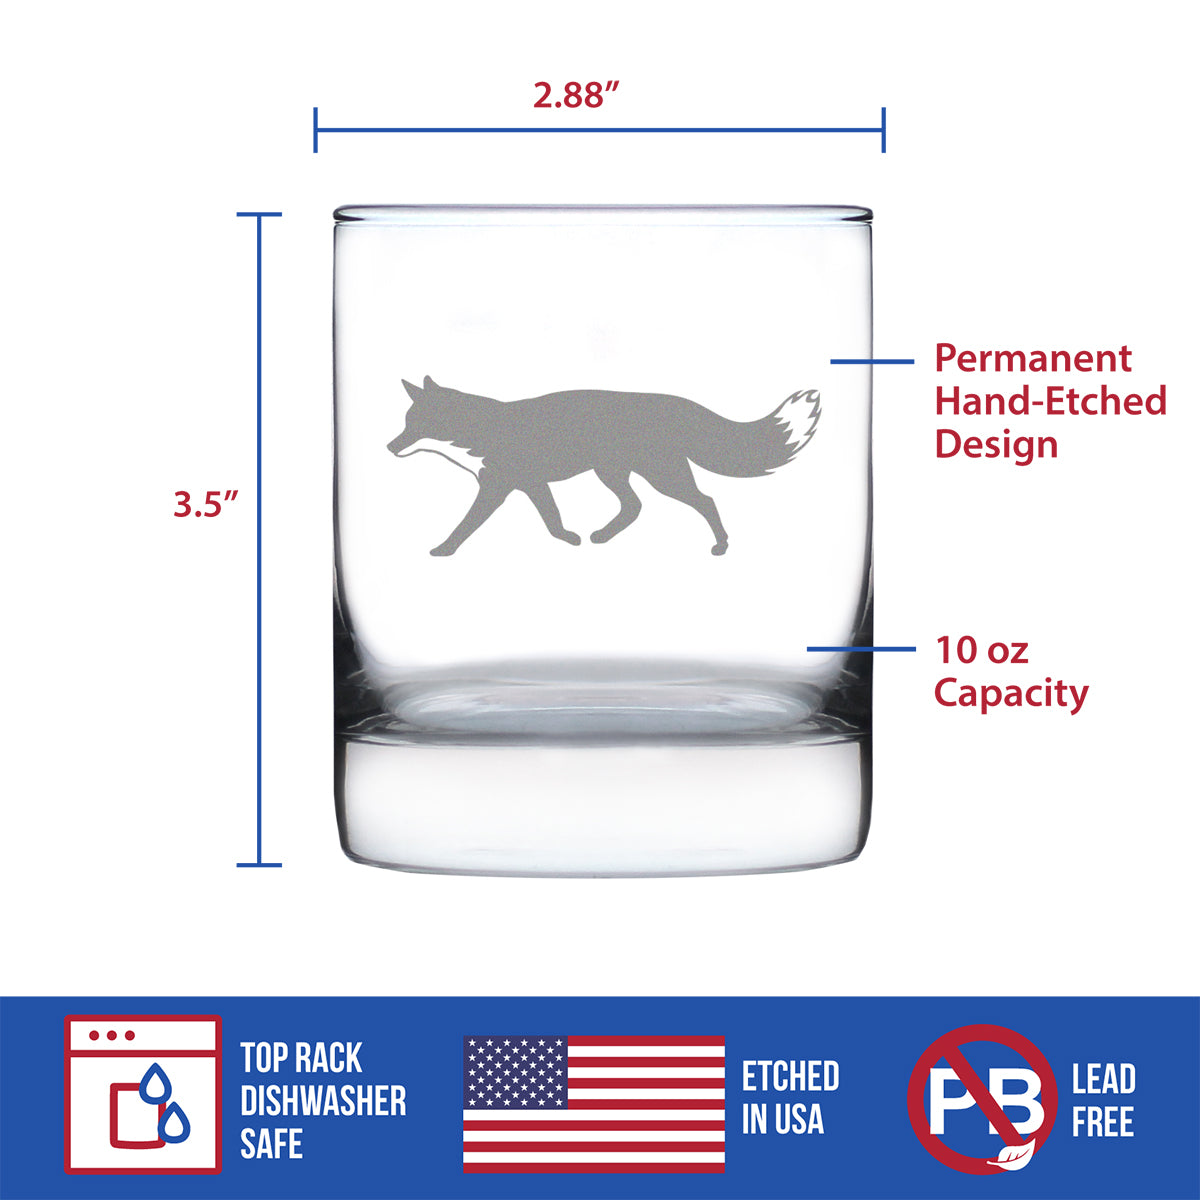 Fox Silhouette Beer Can Pint Glass - Cabin Themed Fox Gifts or Rustic -  bevvee